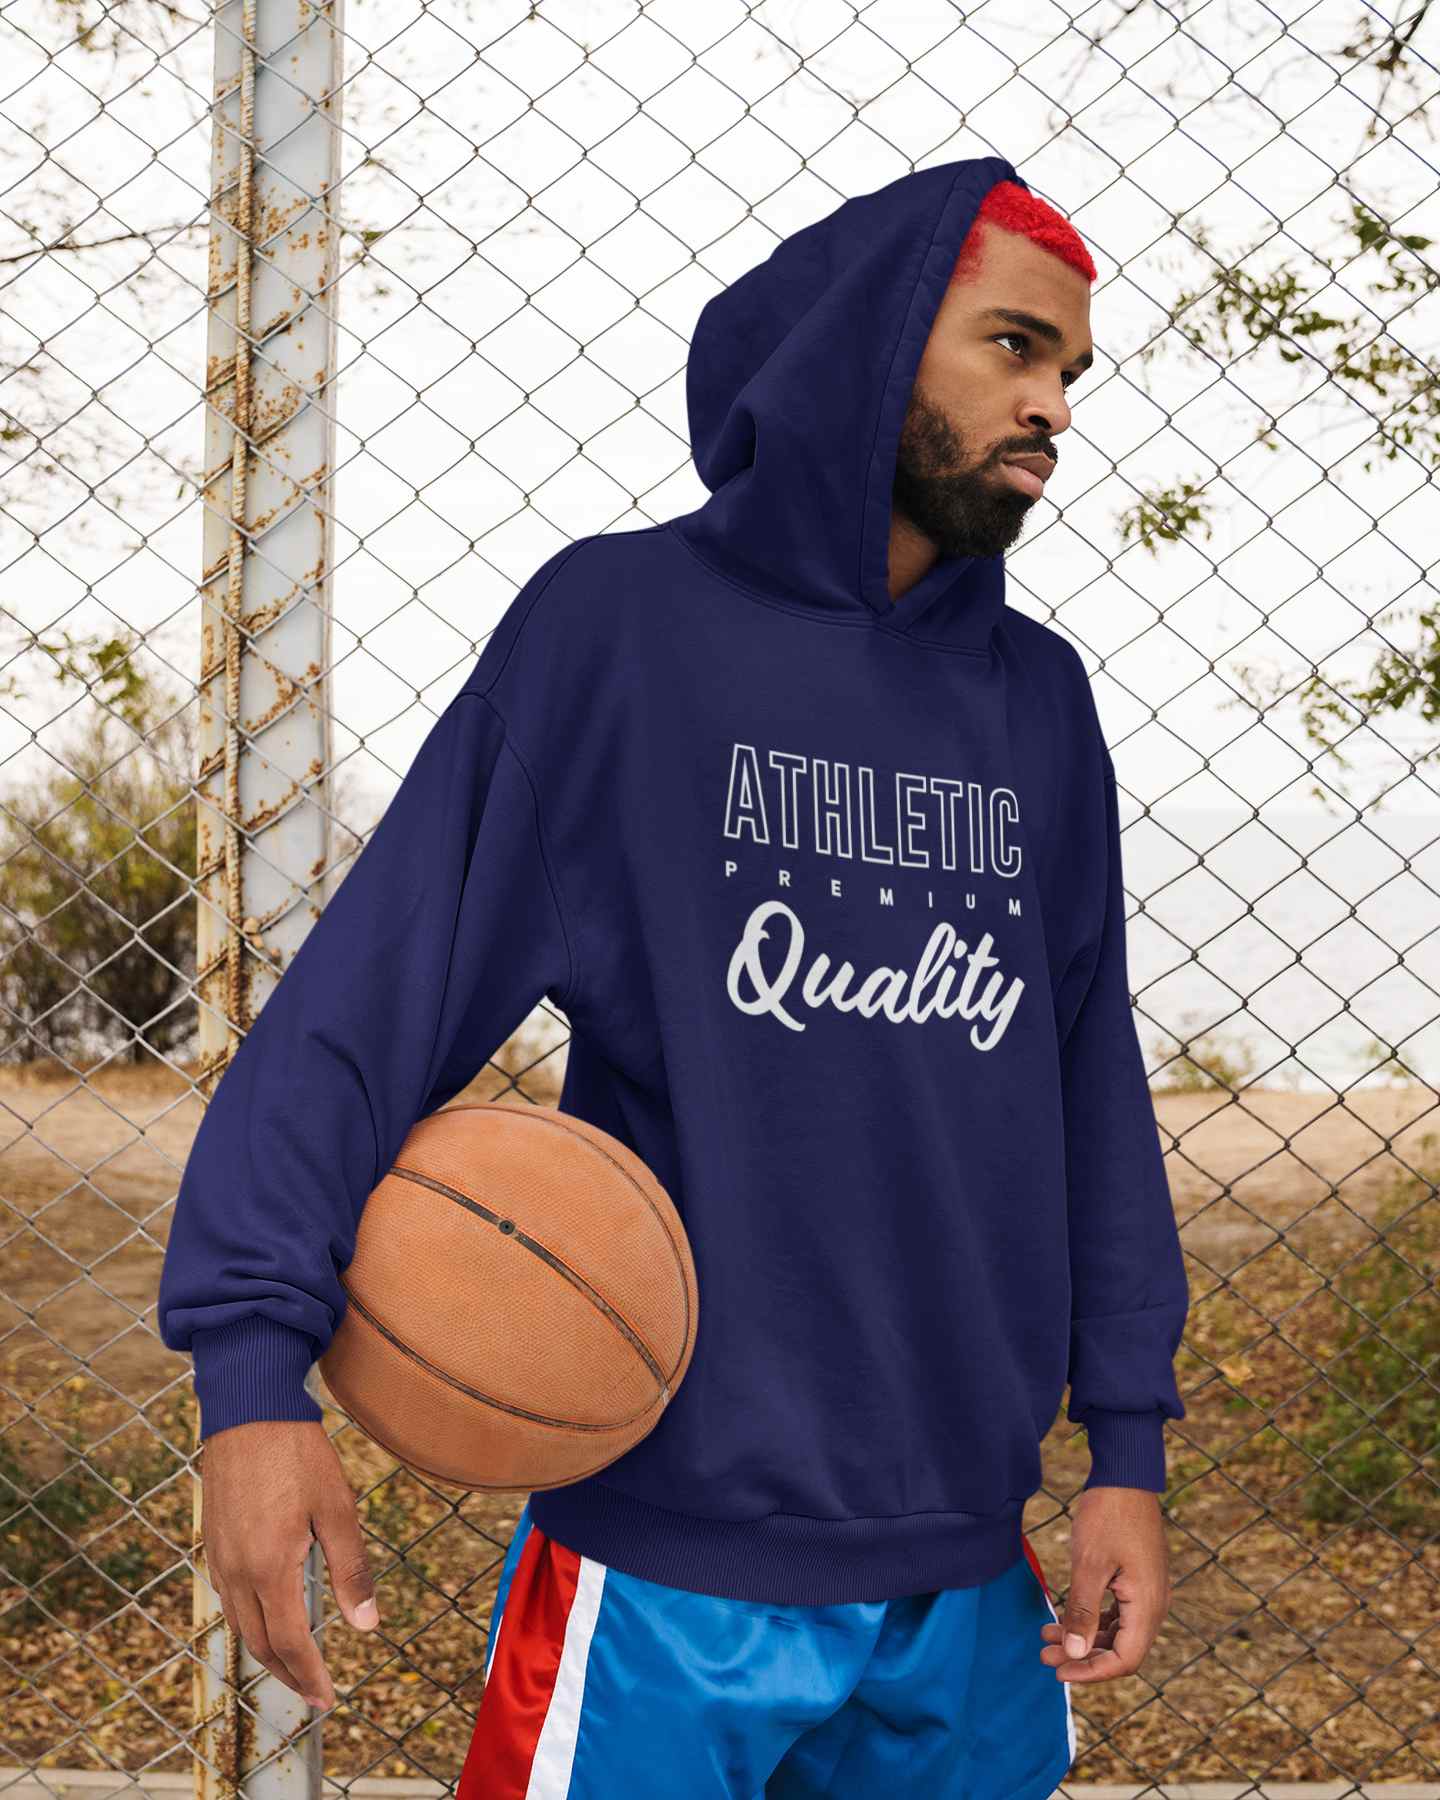 Stylish Hoodies for Men | Athletic Premium Quality Active/Athleisure navy